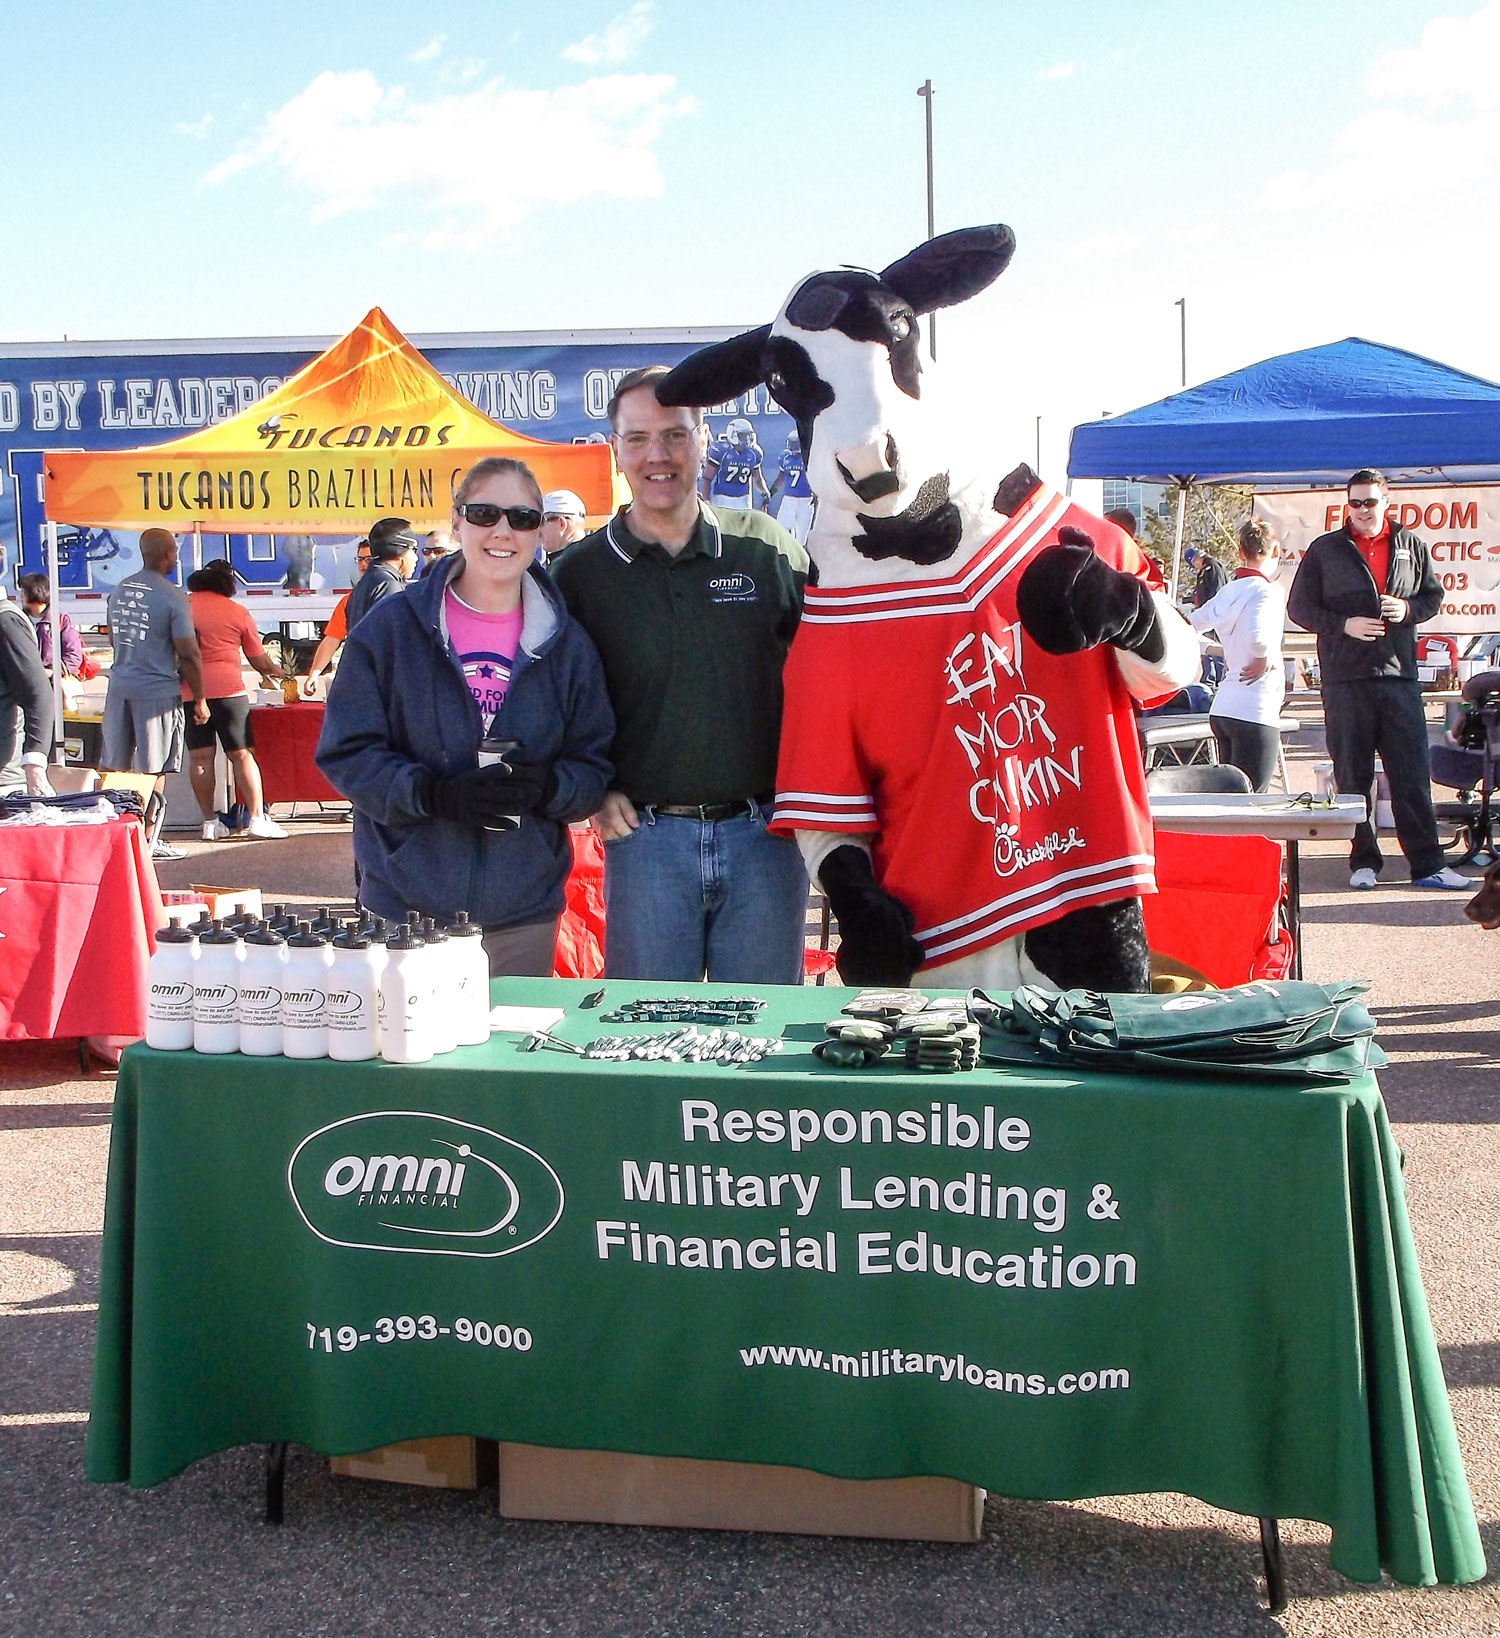 Dave-and-Major-Tammy-Schllichenmaier_May_2014_Armed-Forces-Community-Run_Ft-Carson_CO_image